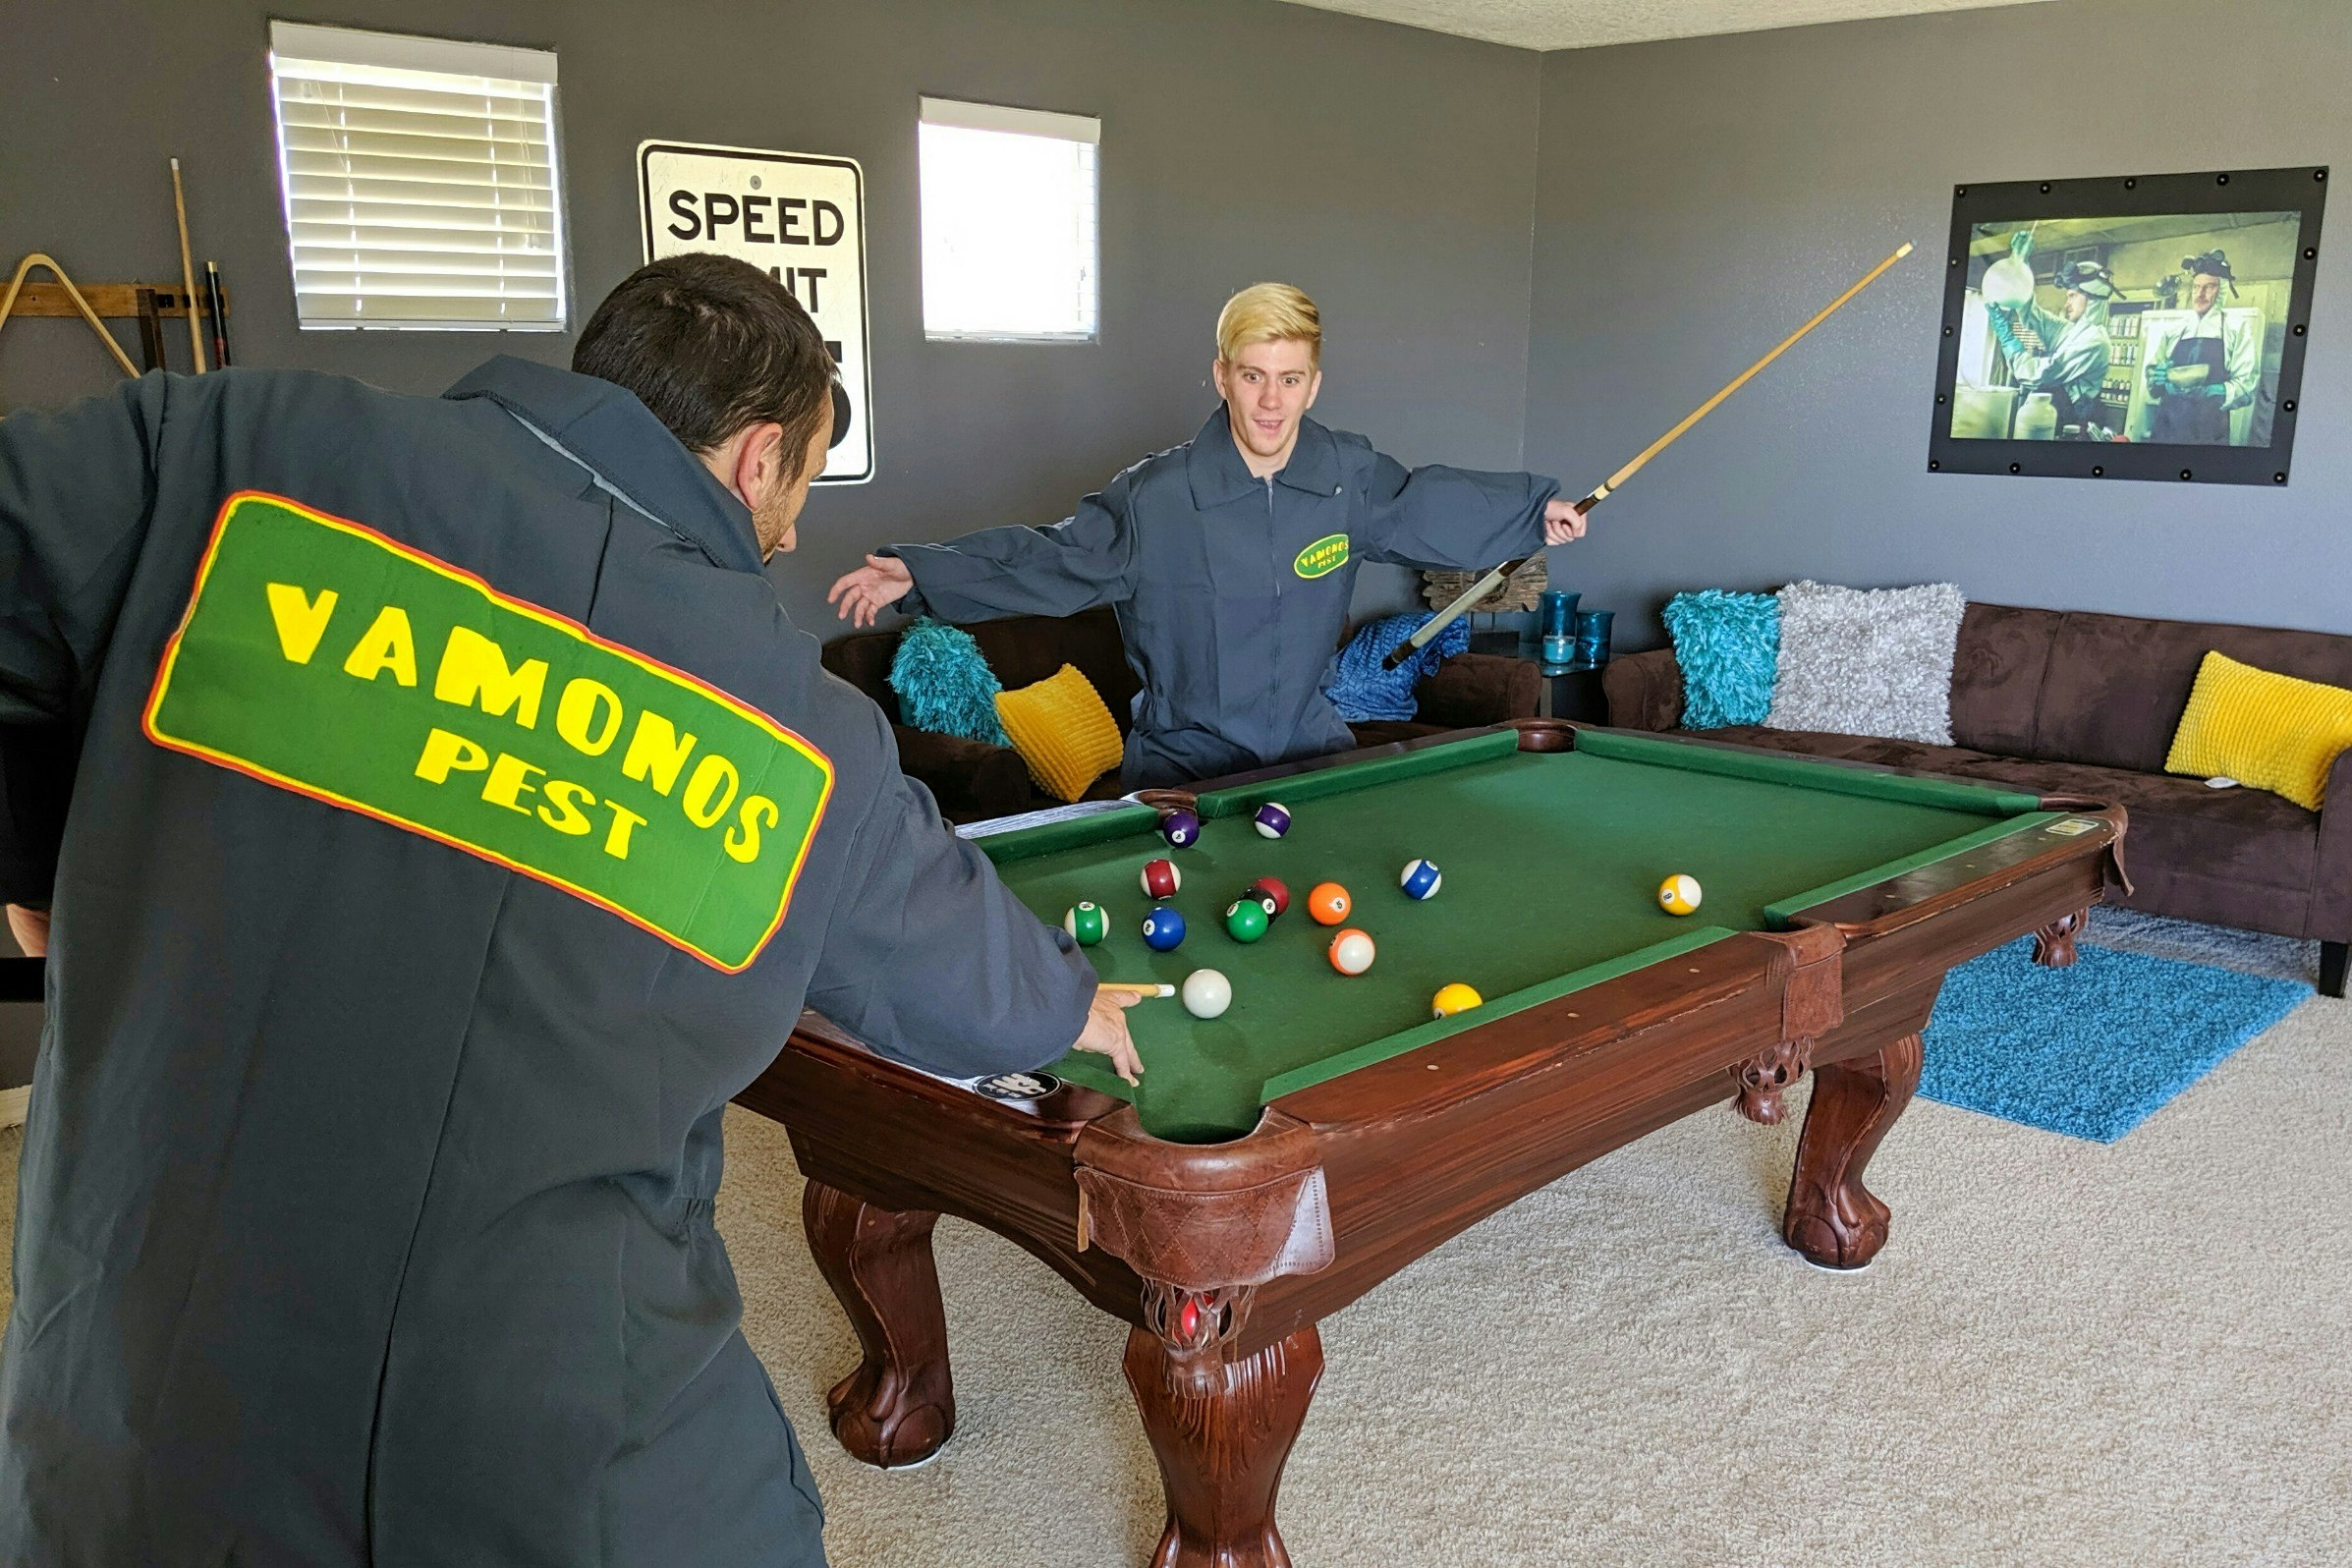 Guests playing pool and wearing Vamanos Pest uniforms